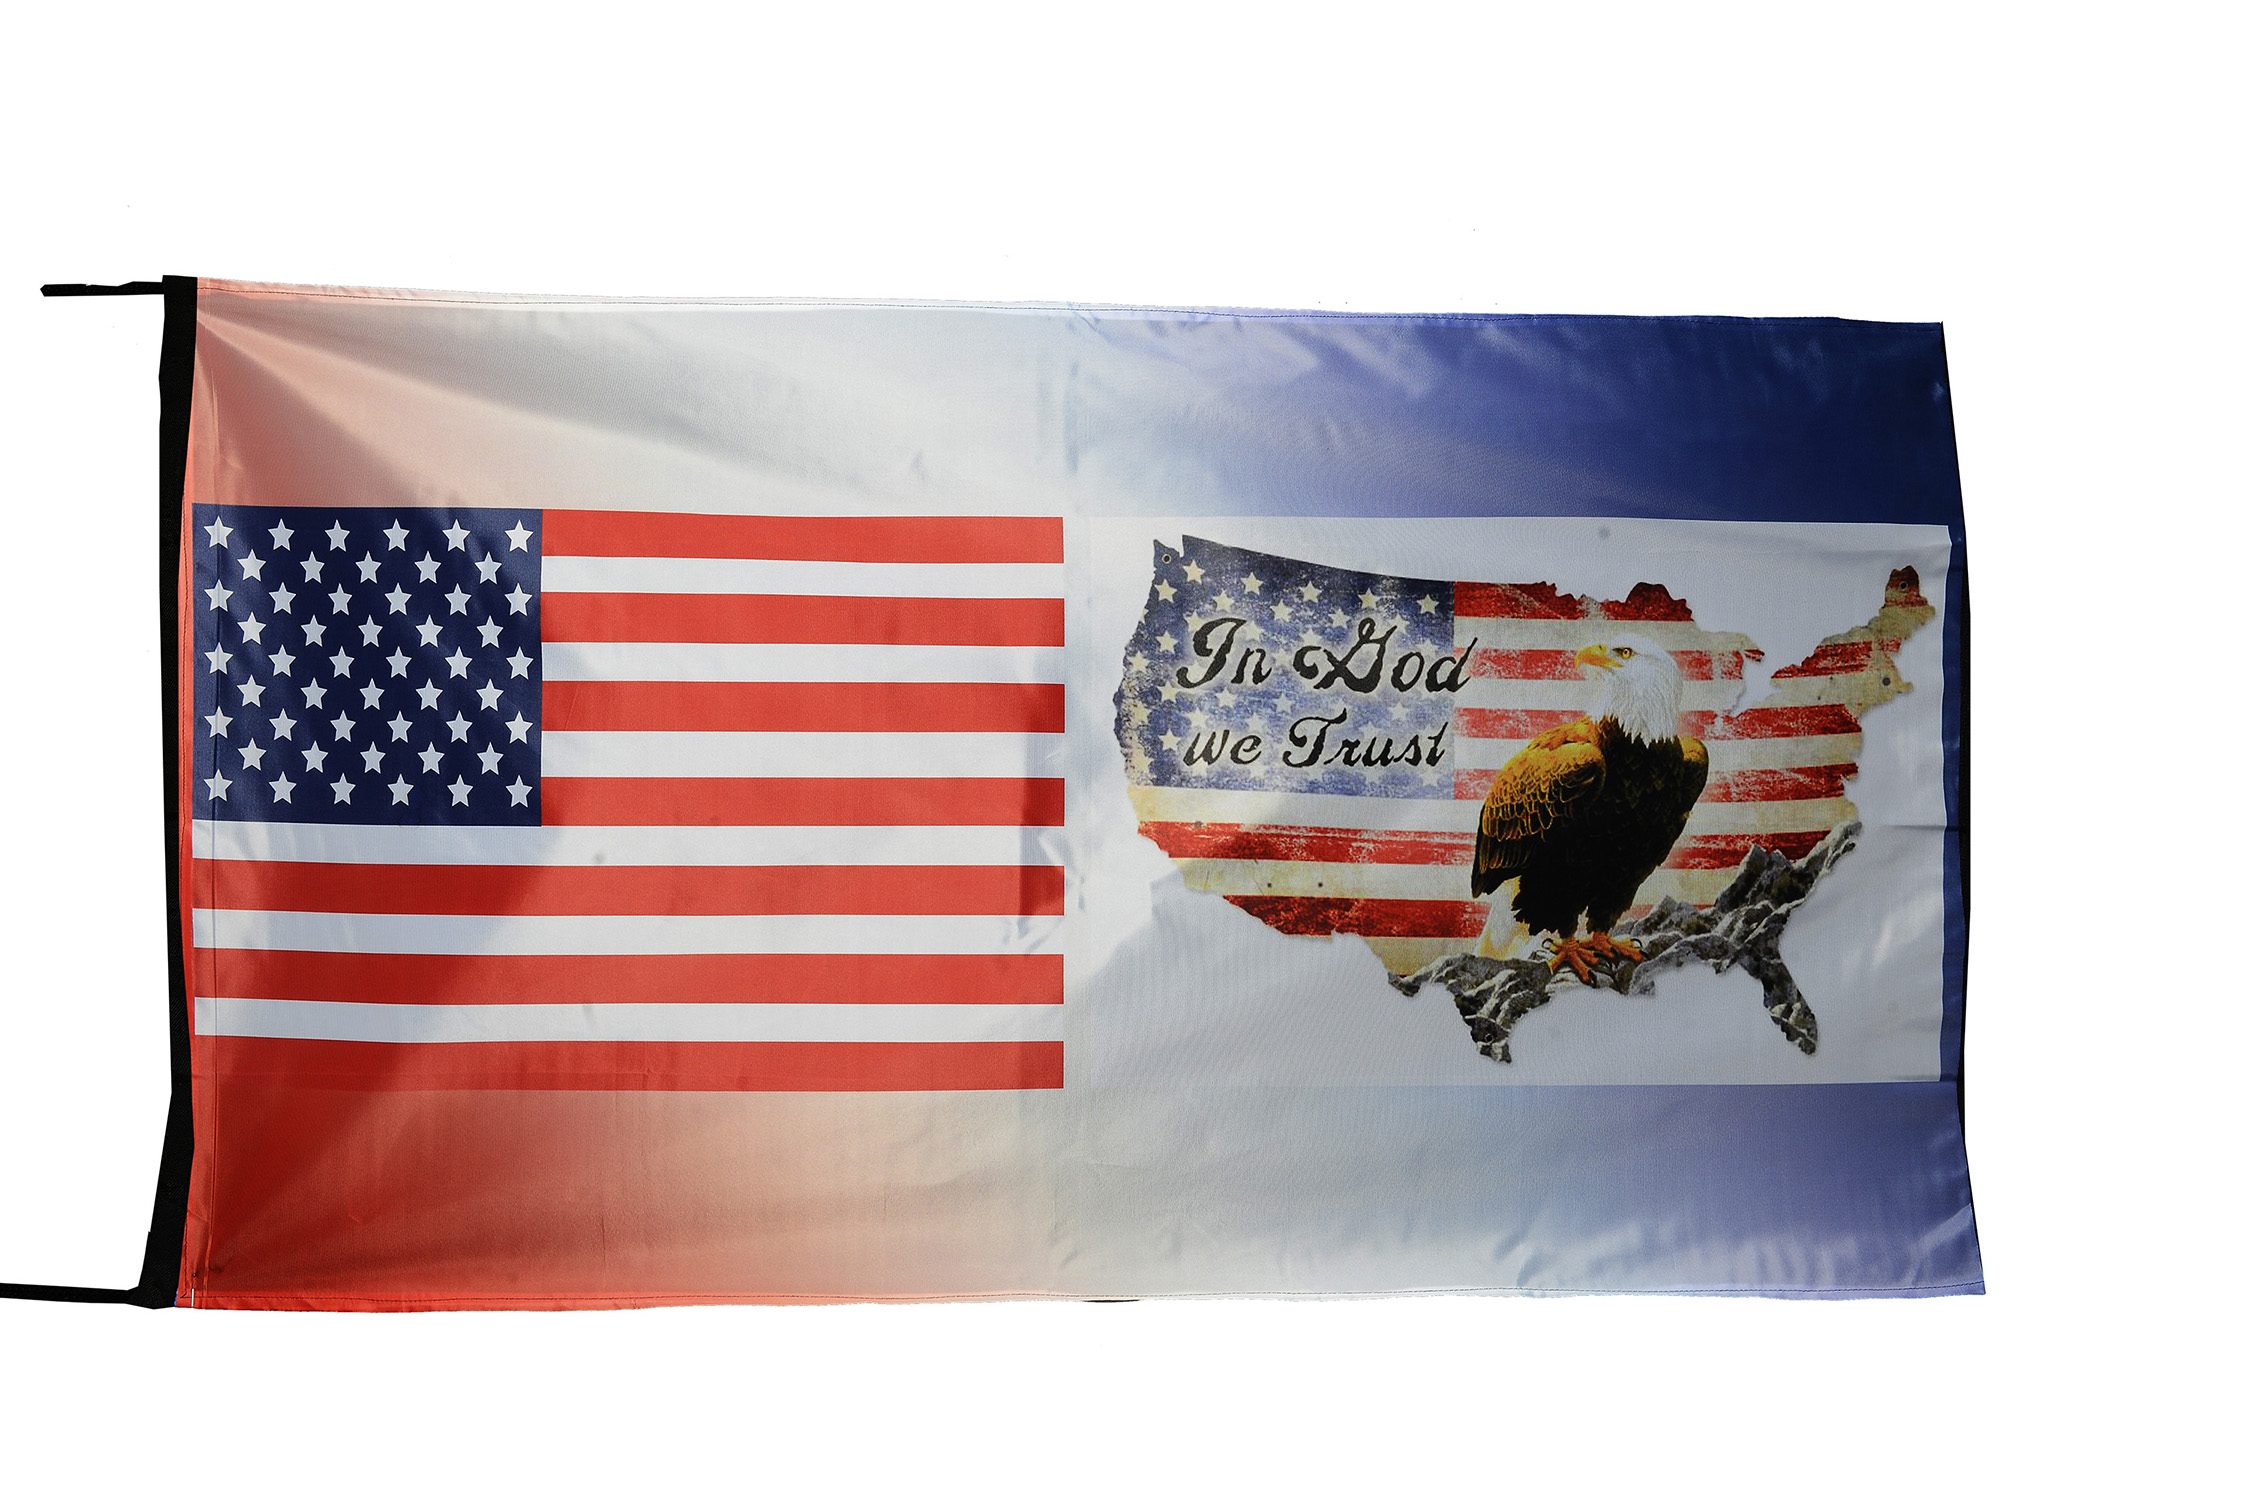 Flag  161 USA / US Country / United States Of America and In God We Trust United We Stand / Patriotic / Pride Hybrid Weather-Resistant Polyester Outdoor Flag Landscape Banner / Vivid Colors / 3 X 5 FT (150 x 90cm) International Flags for Sale